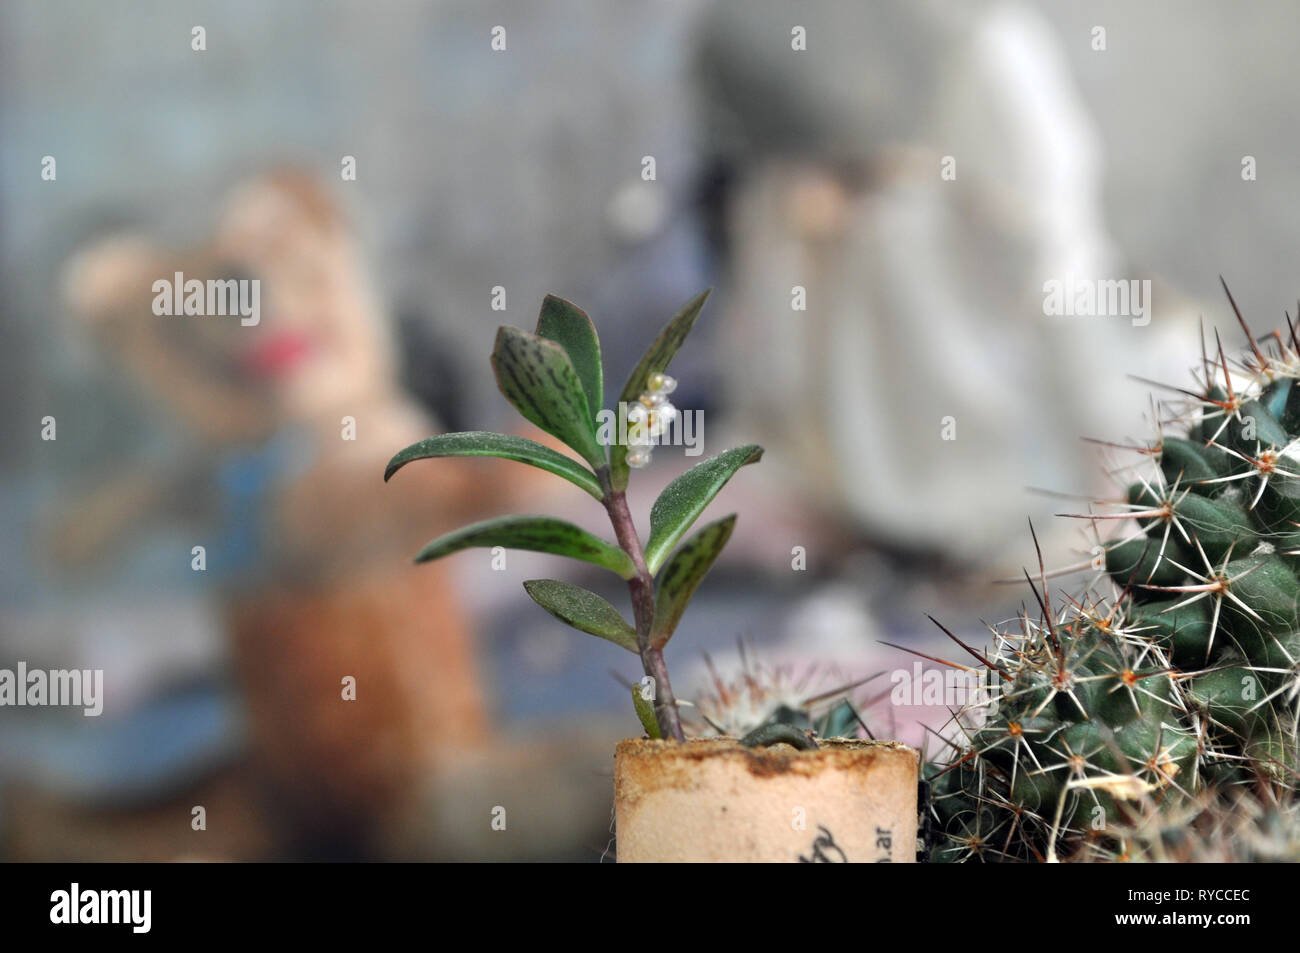 Cimex lectularius eggs in a kalanchoe plant with a teddy bear in the background anda a cactus Stock Photo